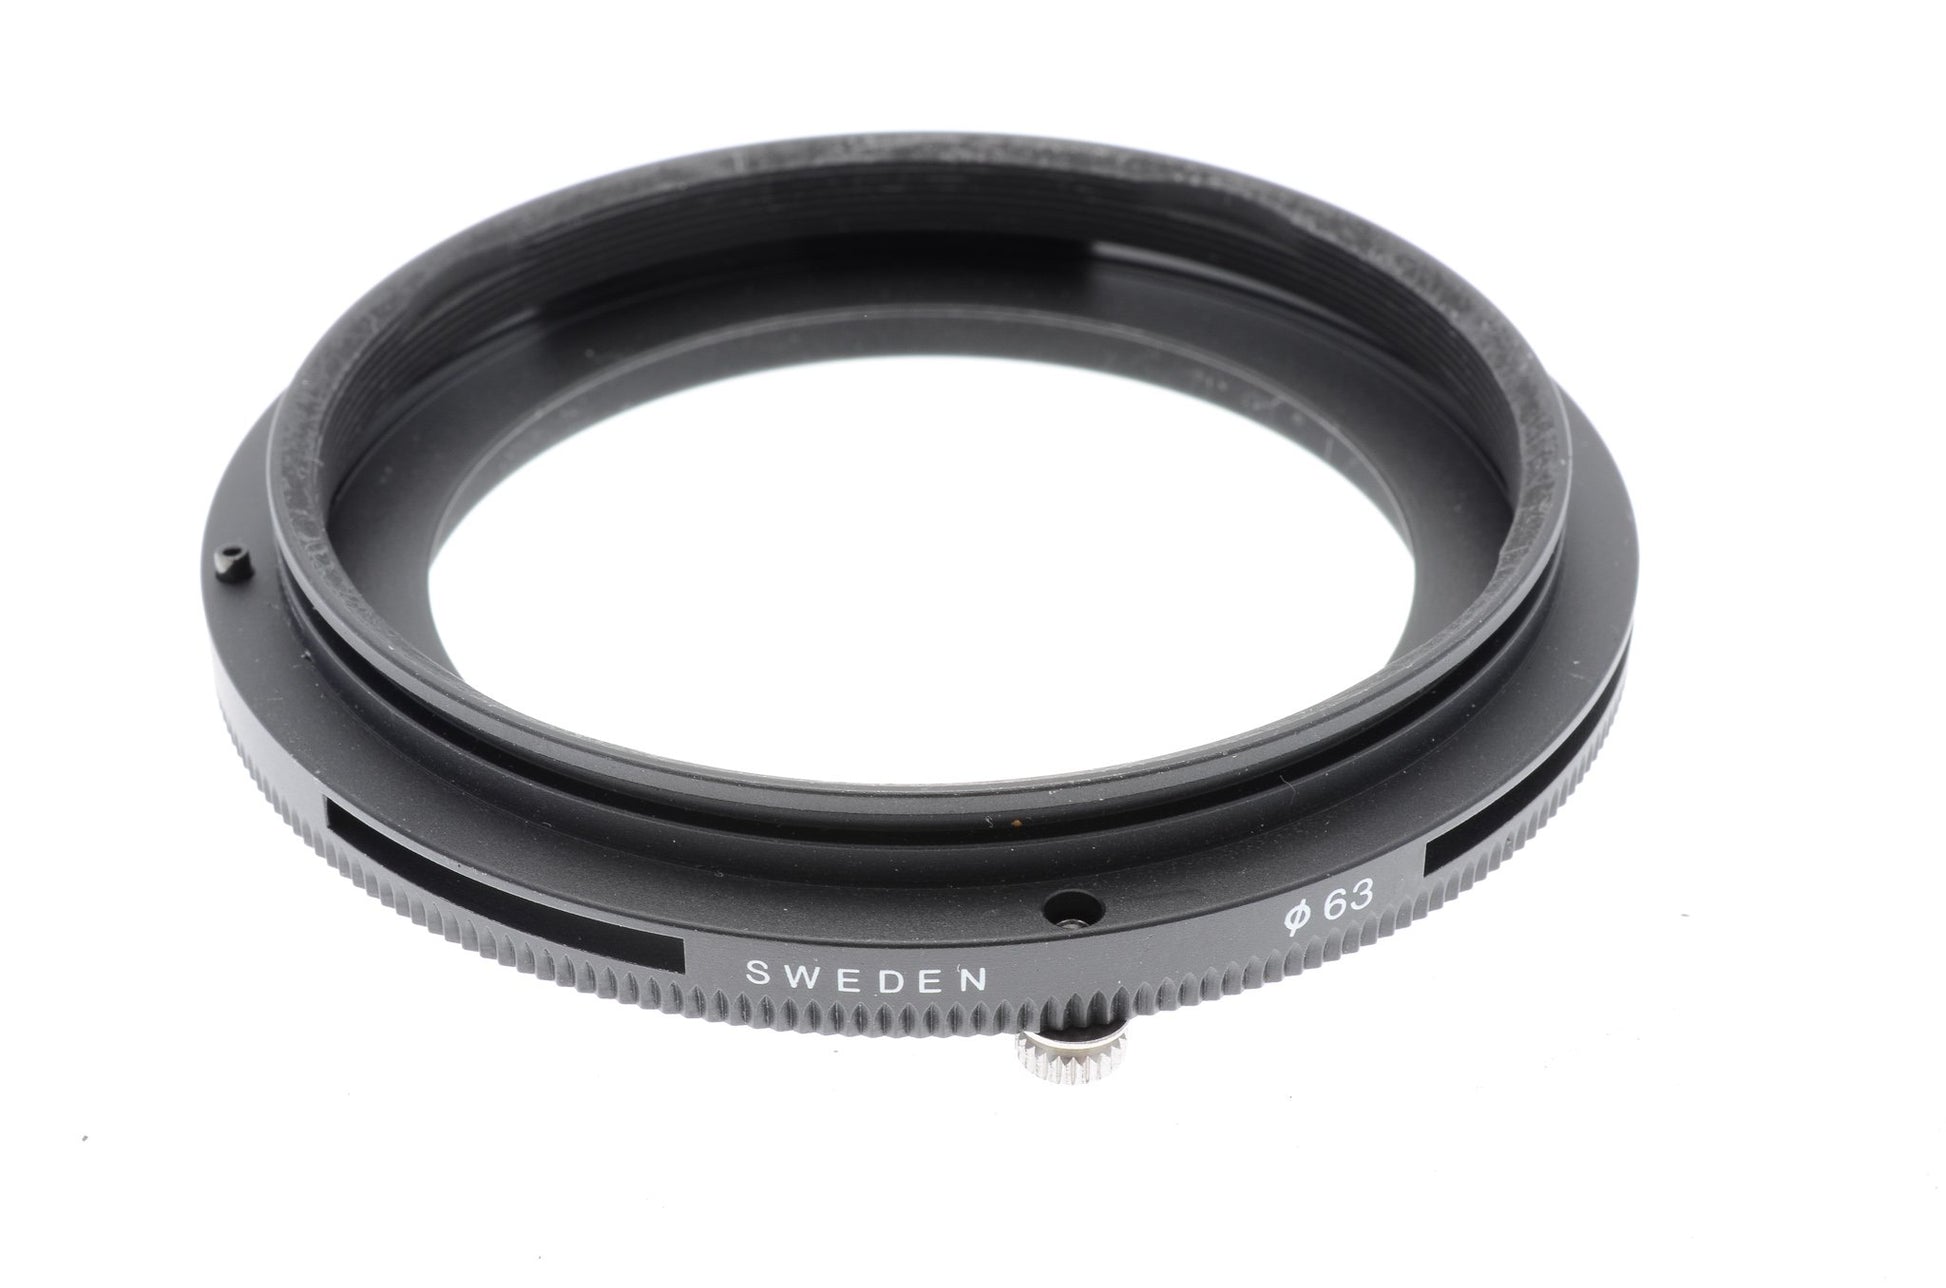 Hasselblad 63mm Lens Mounting Ring for Pro Shade 40676 - Accessory